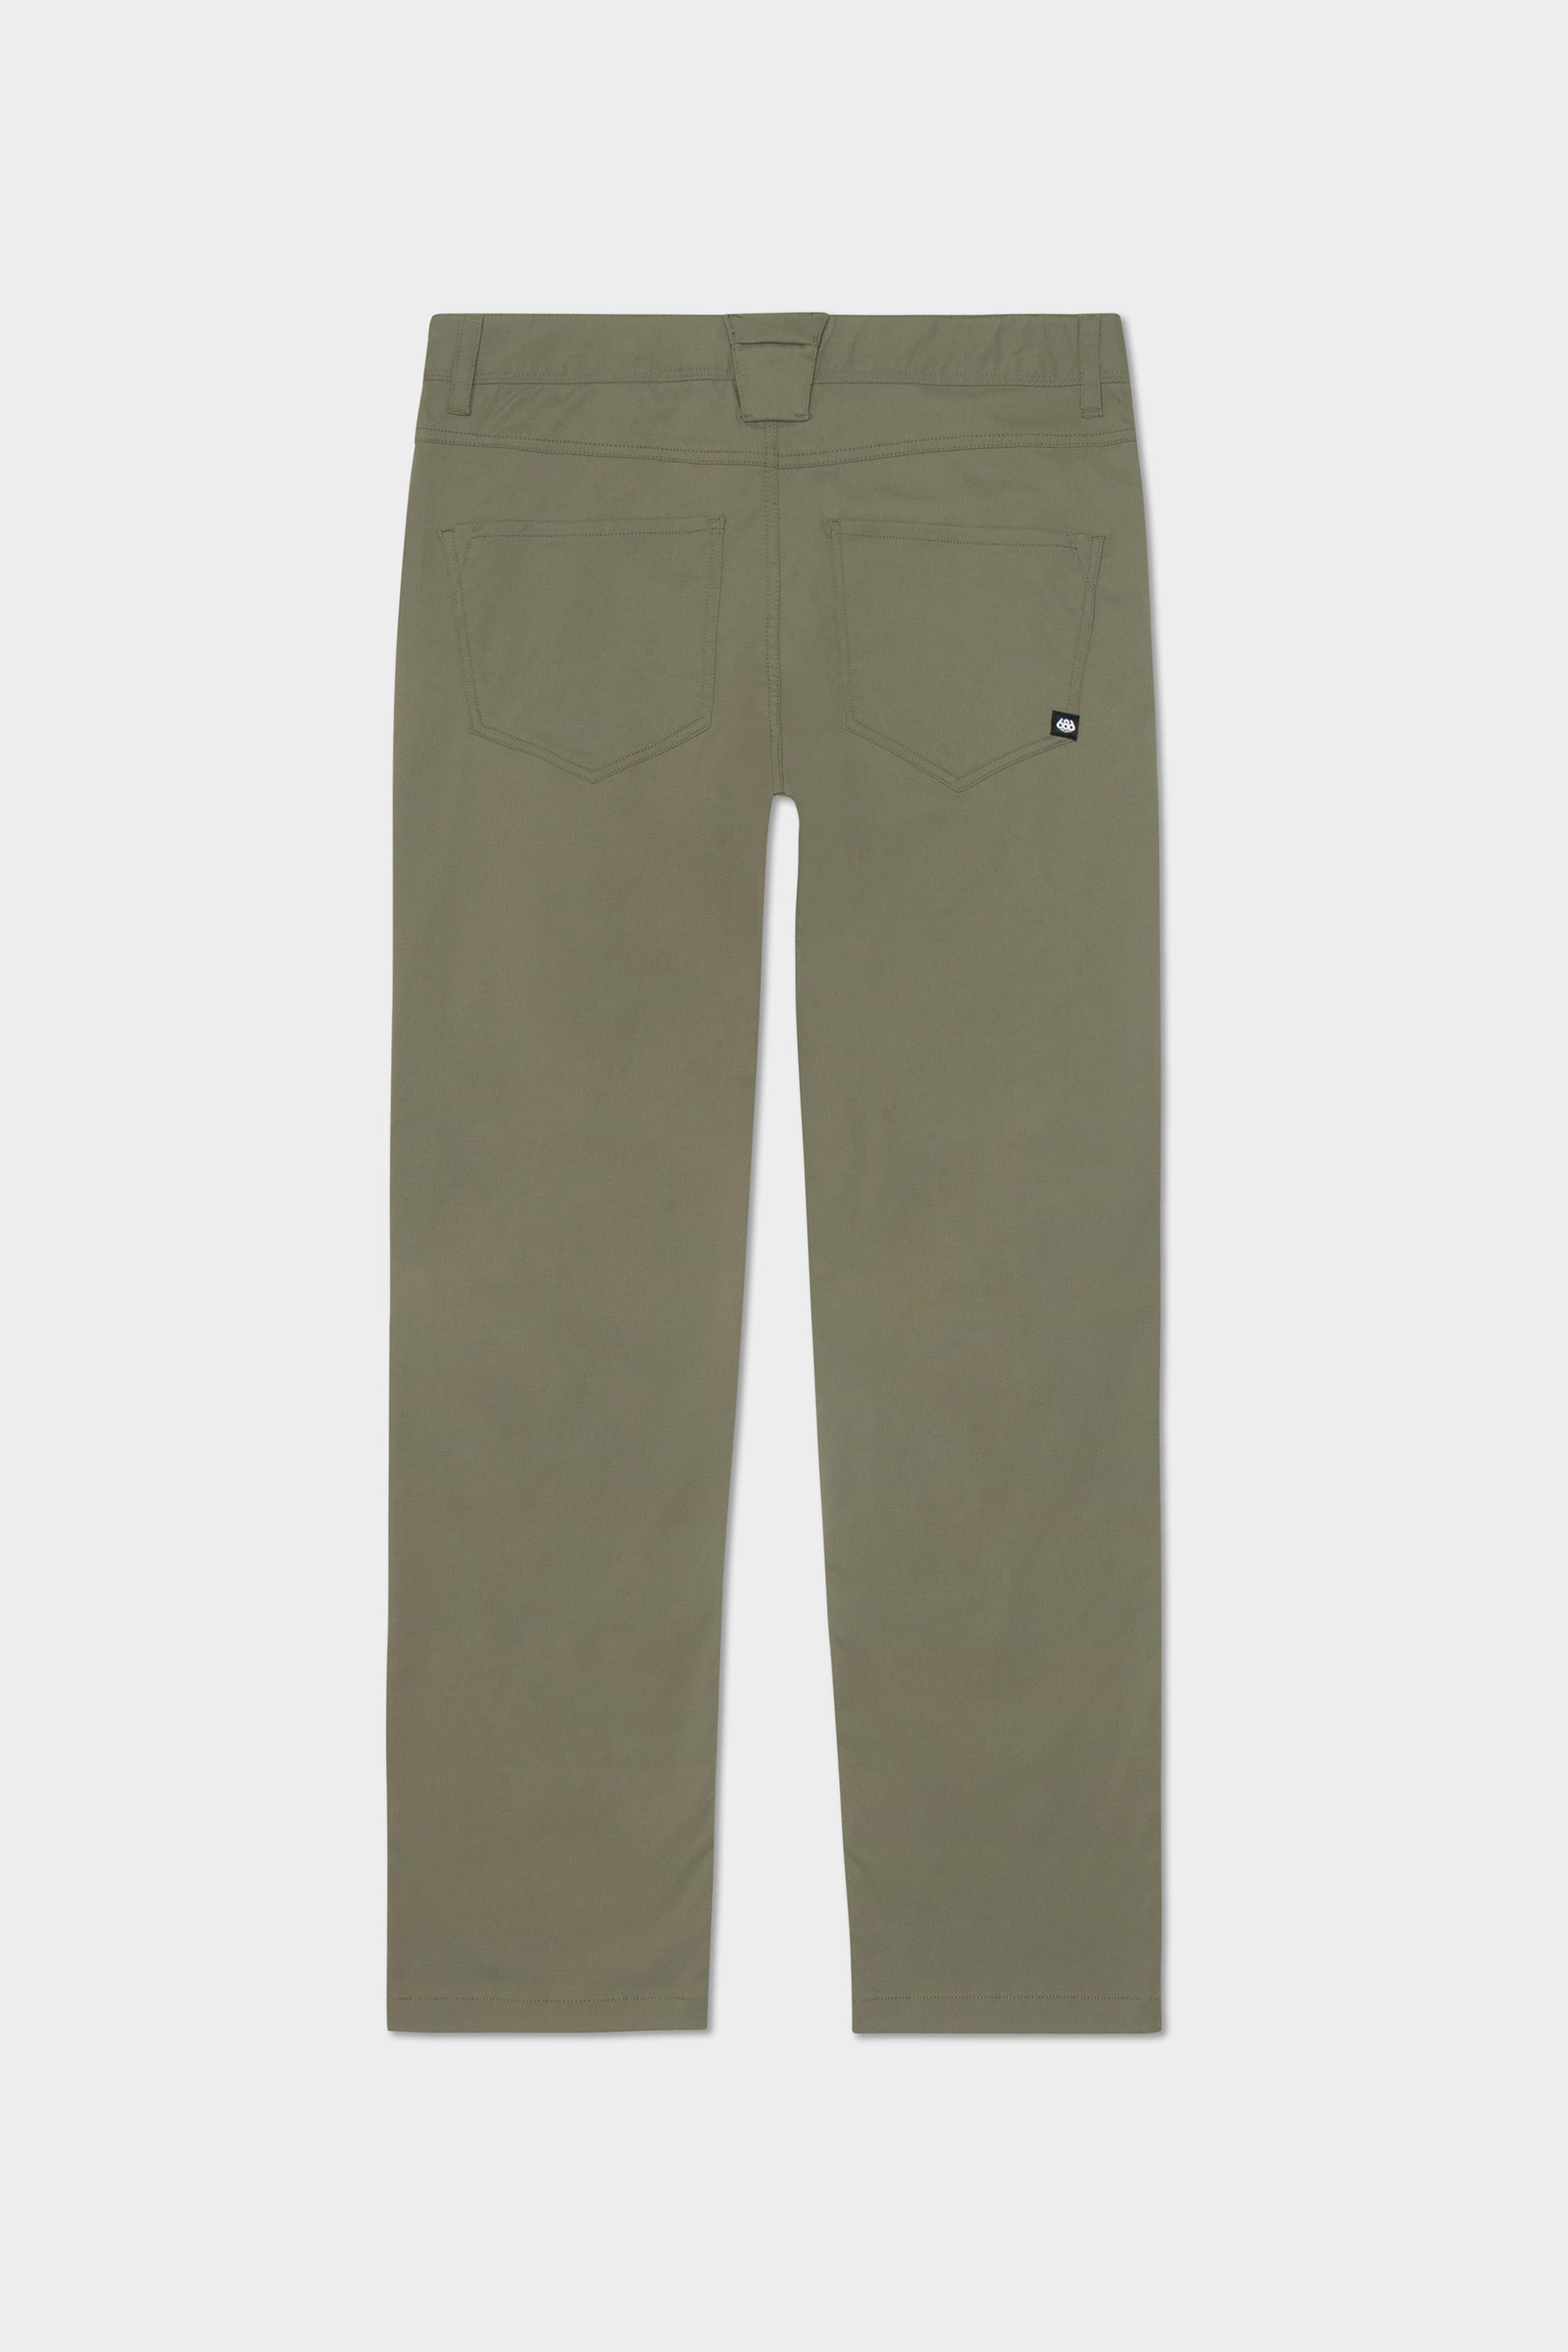 Alternate View 51 of 686 Men's Everywhere Pant - Relaxed Fit